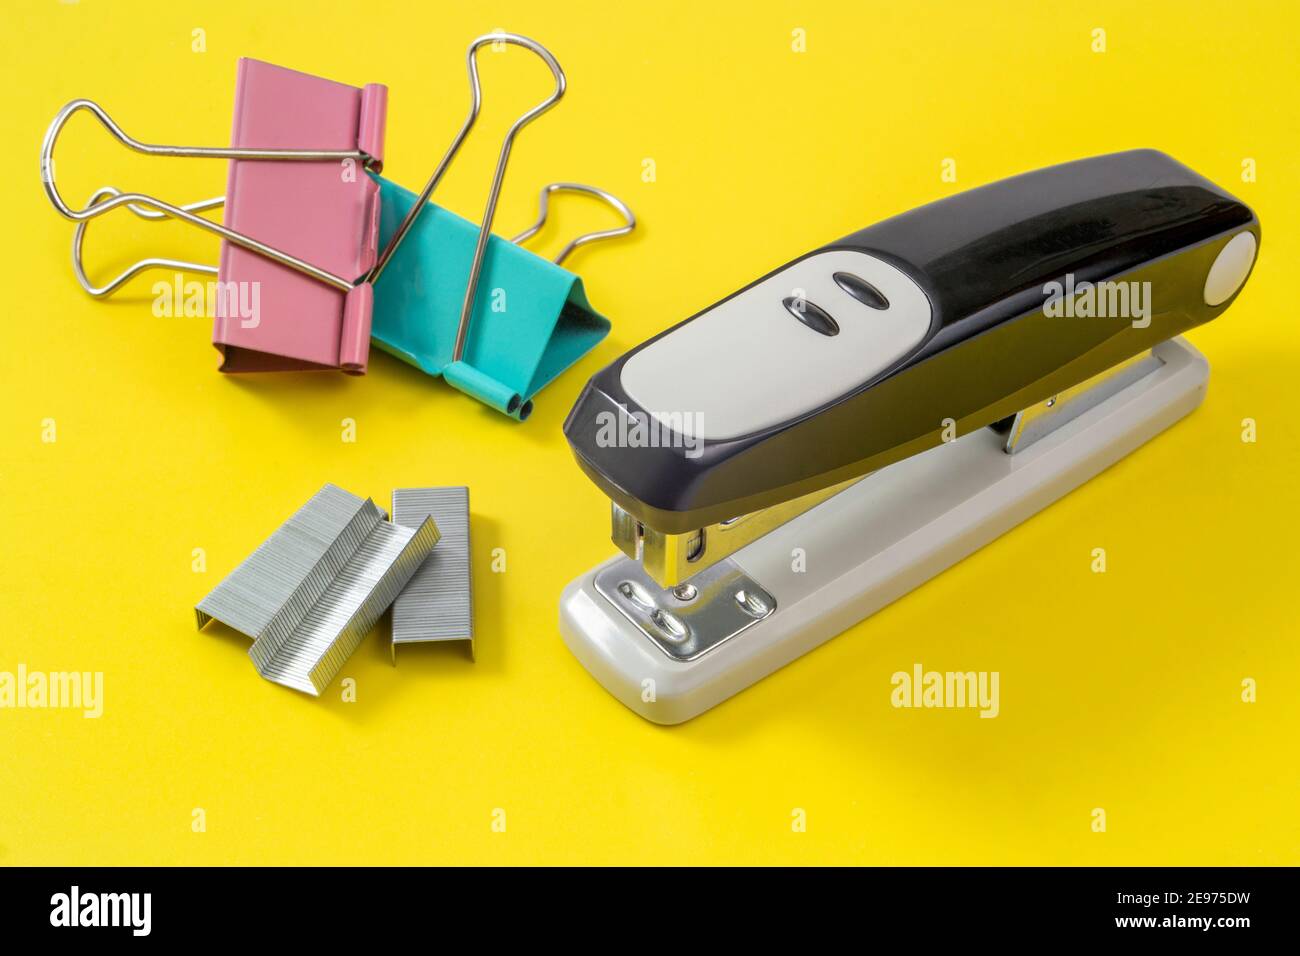 office supplies-stapler, paper clips and clothespins lie on a yellow background Stock Photo